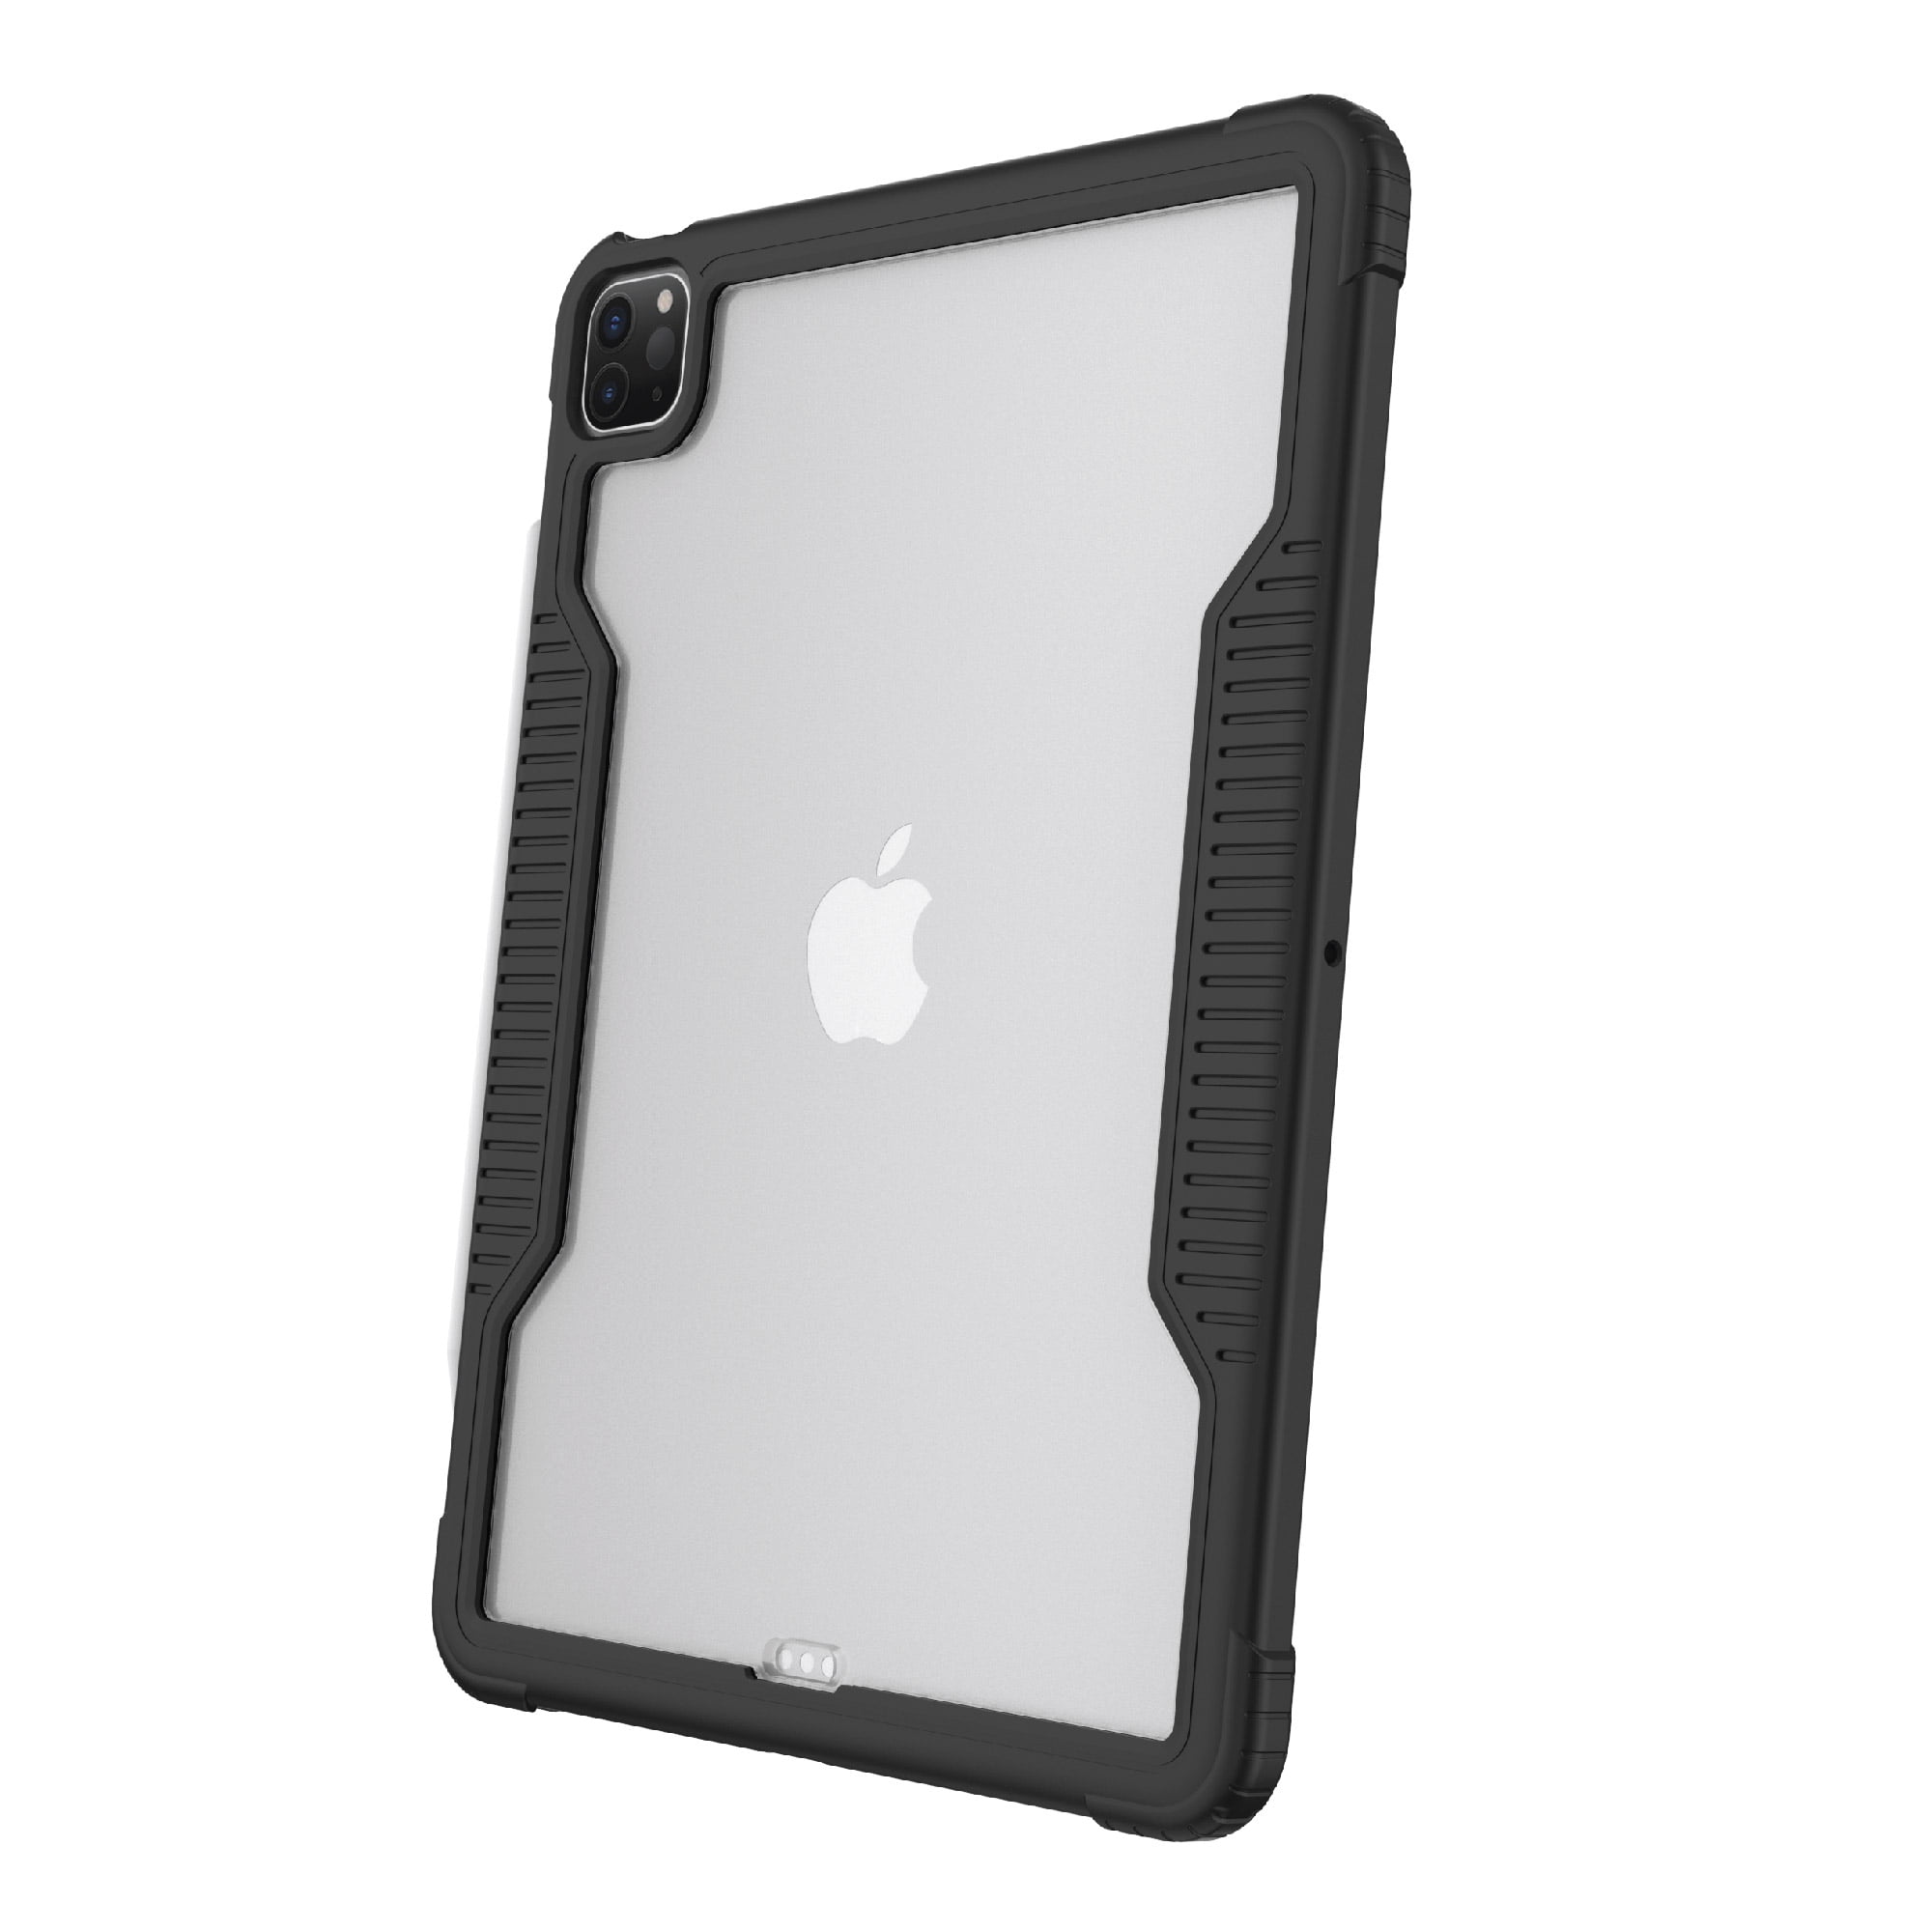 onn. Slim Rugged Tablet Case for iPad Pro 11 (1st, 2nd, 3rd, 4th generation)  / 10.9 iPad Air (4th, 5th generation) - Black/Clear 